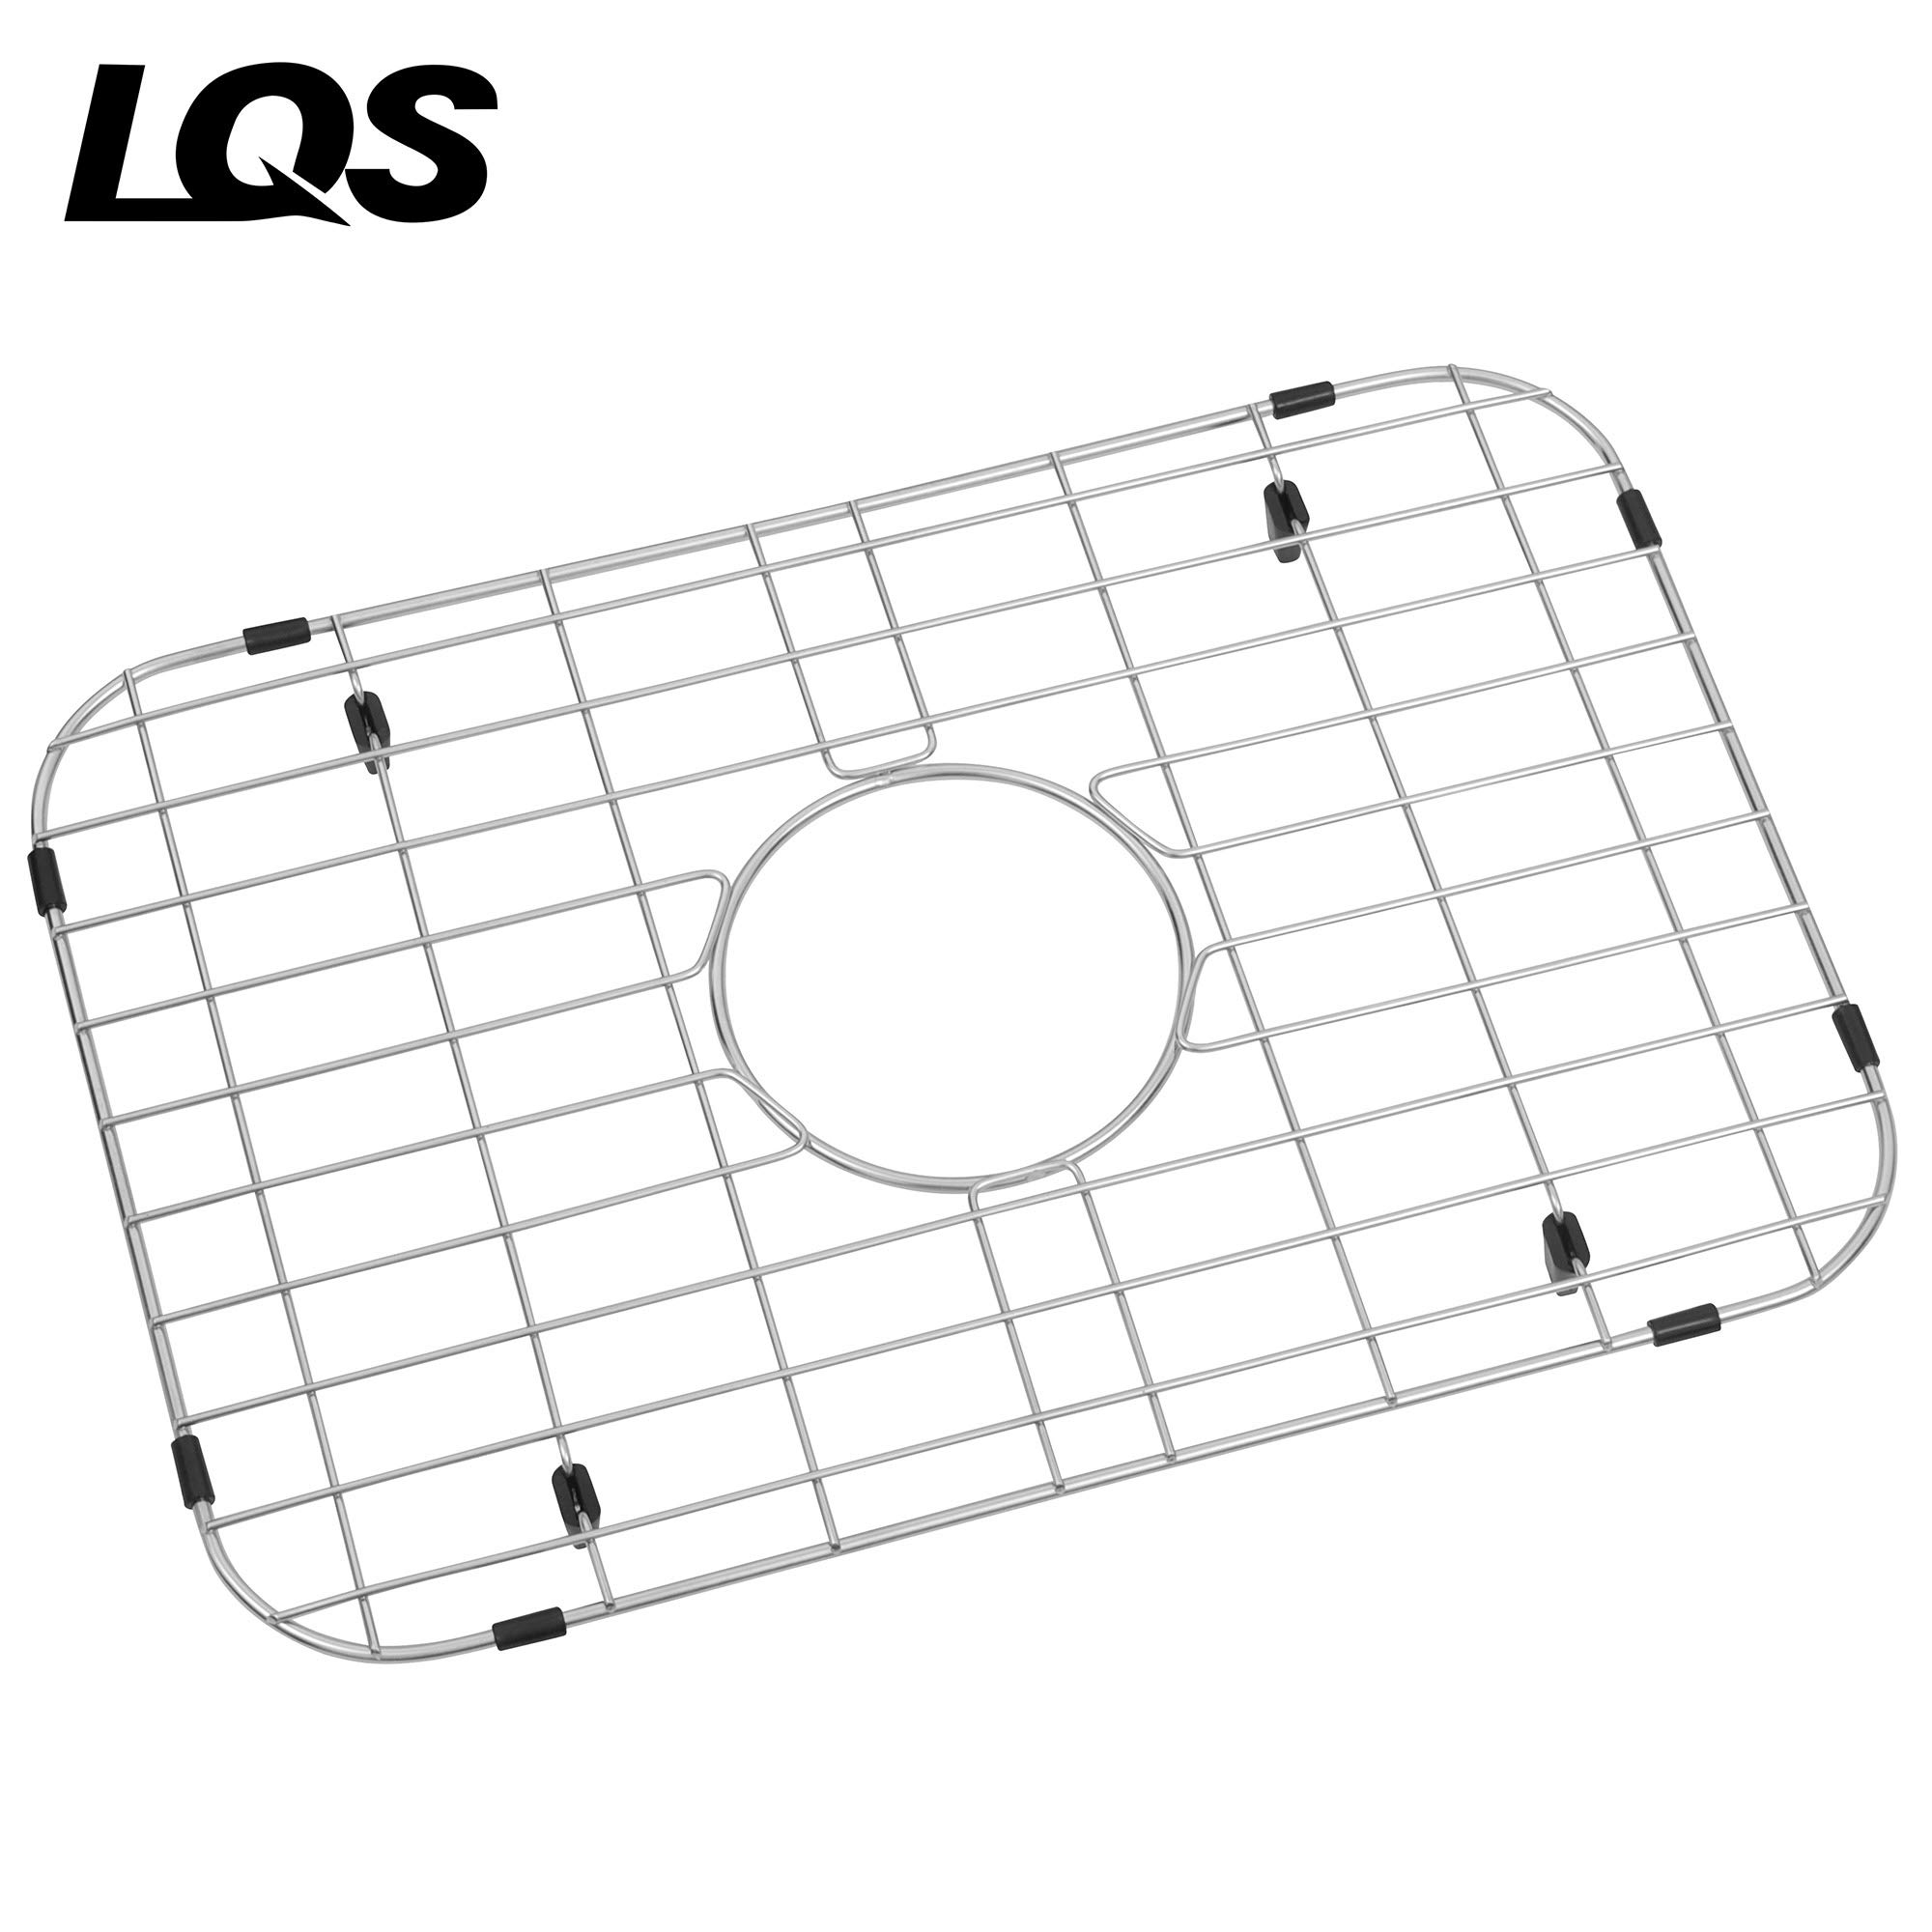 LQS Stainless Steel Sink Protectors, Kitchen Sink Grid 18 7/8" x 12 5/8" with Center Drain Hole for Single Sink Bowl, Sink Protector, Kitchen Sink Grate, Sink Bottom Grid